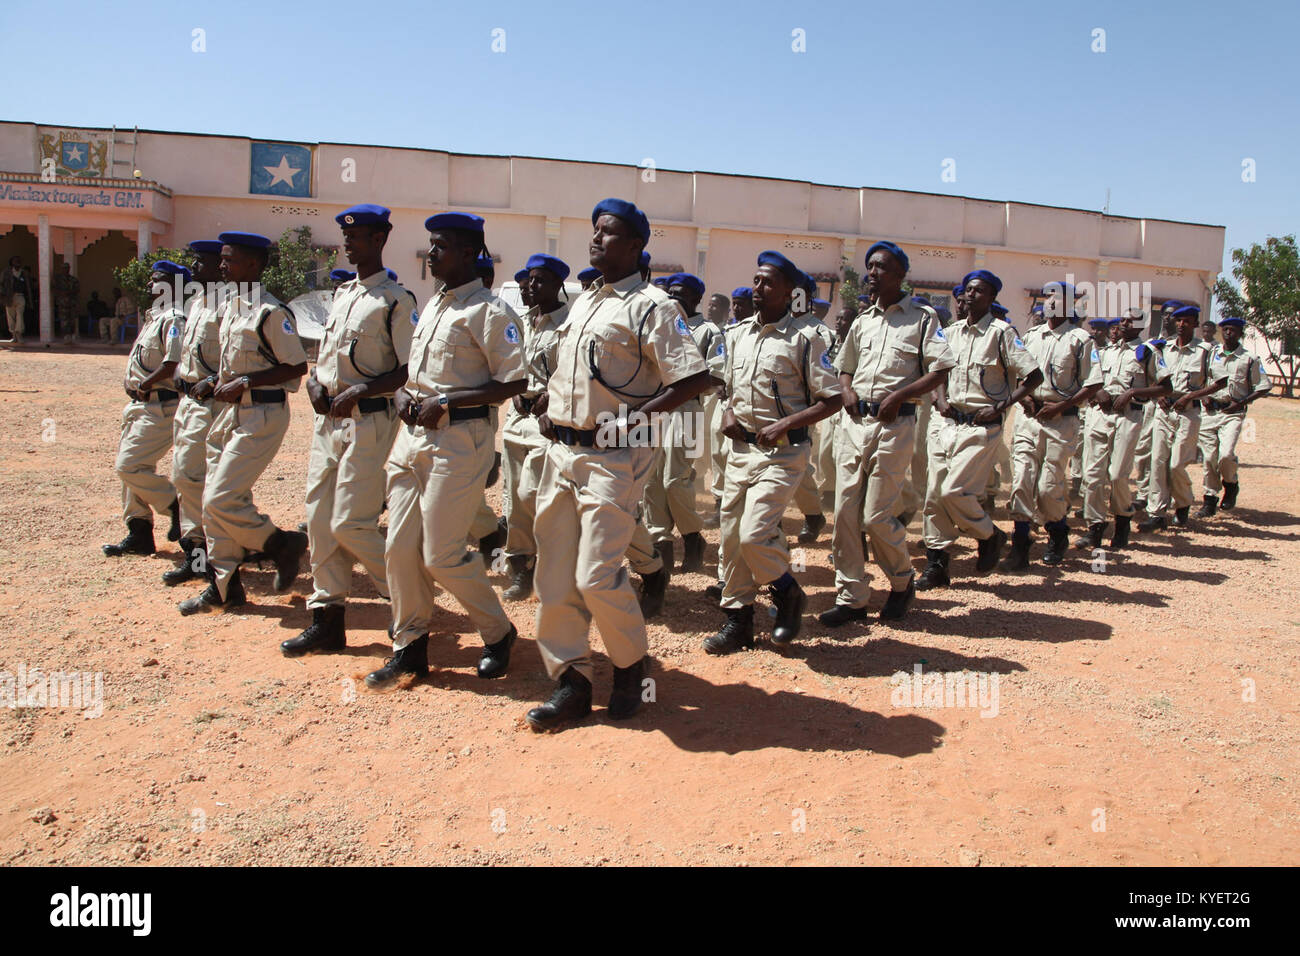 police-officers-from-puntland-and-galmudug-state-march-at-a-parade-KYET2G.jpg